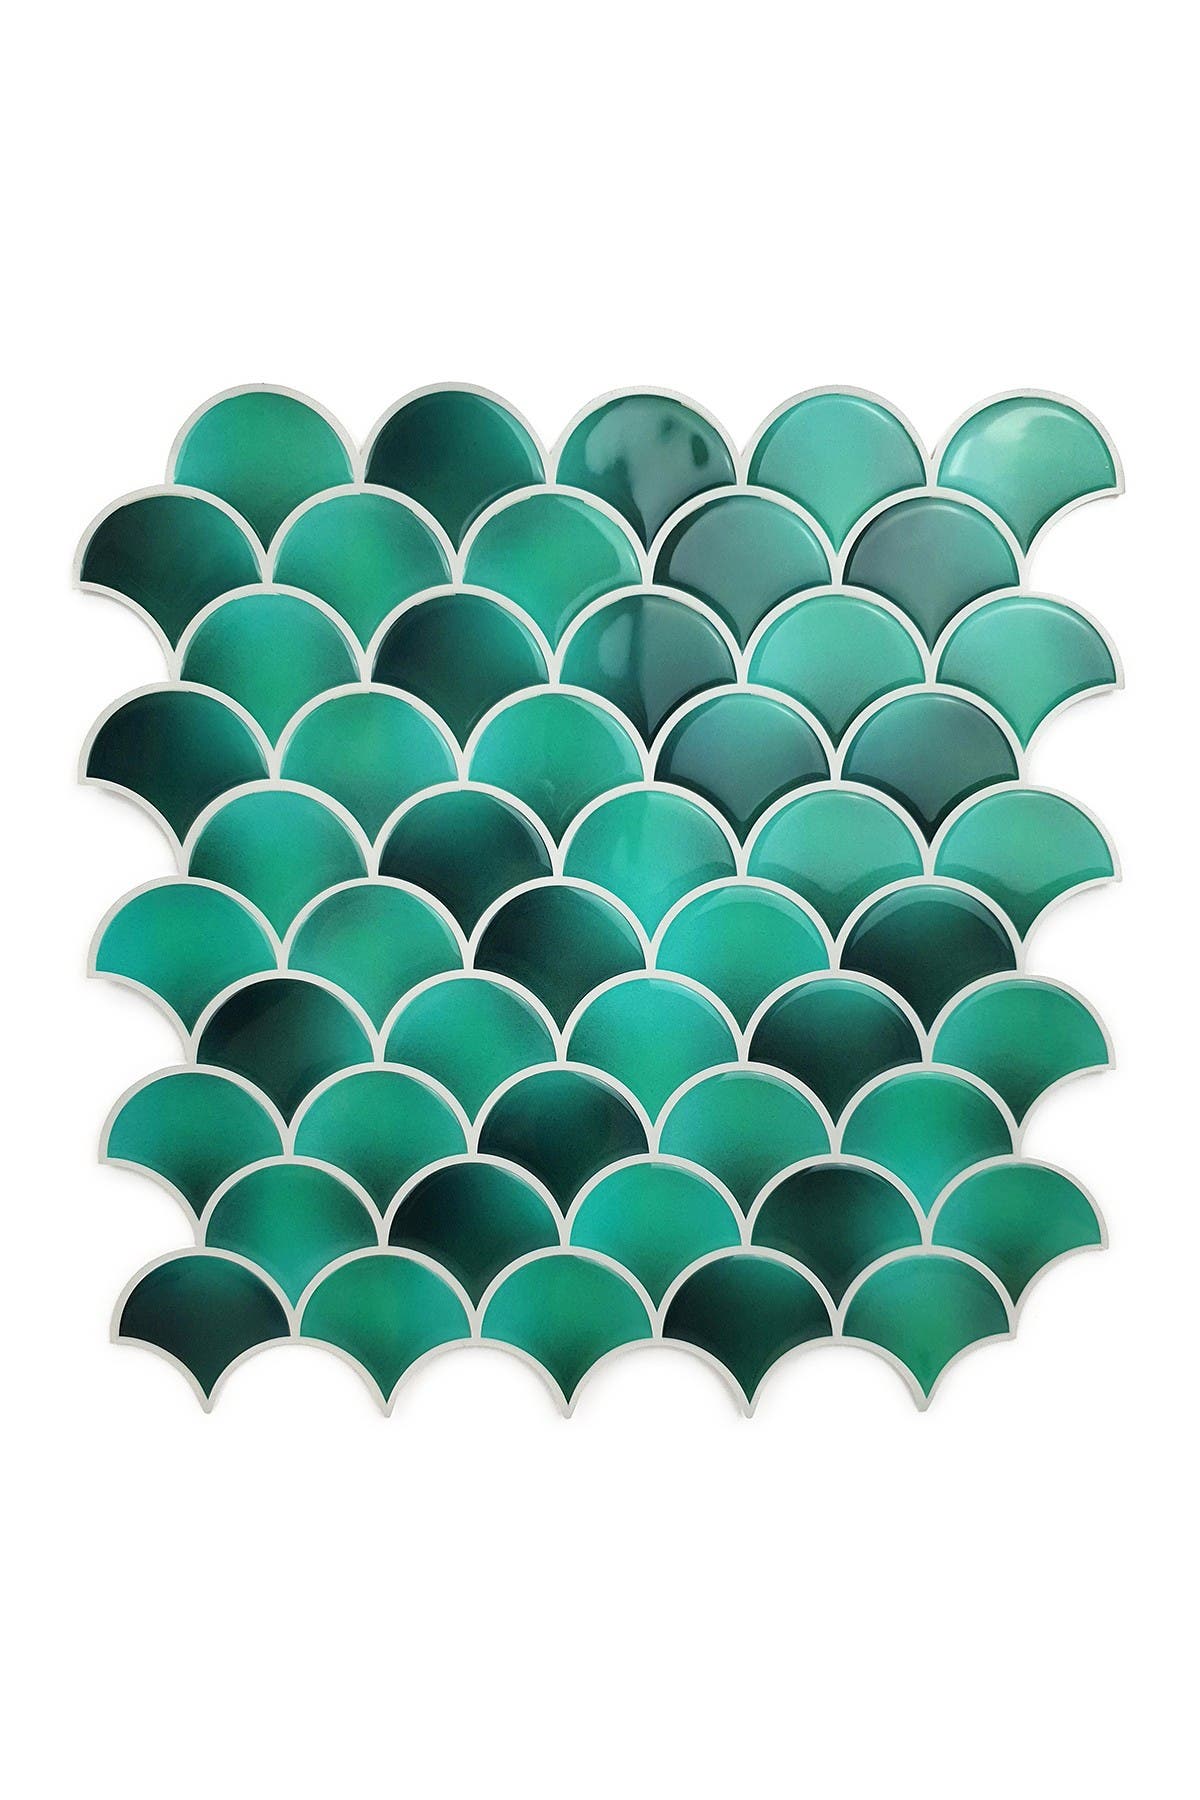 Walplus Fresh Turquoise Glossy 3d Metro Sticker Tiles Contemporary Eclectic Wall Splashbacks Mosaics In Open Miscellaneous